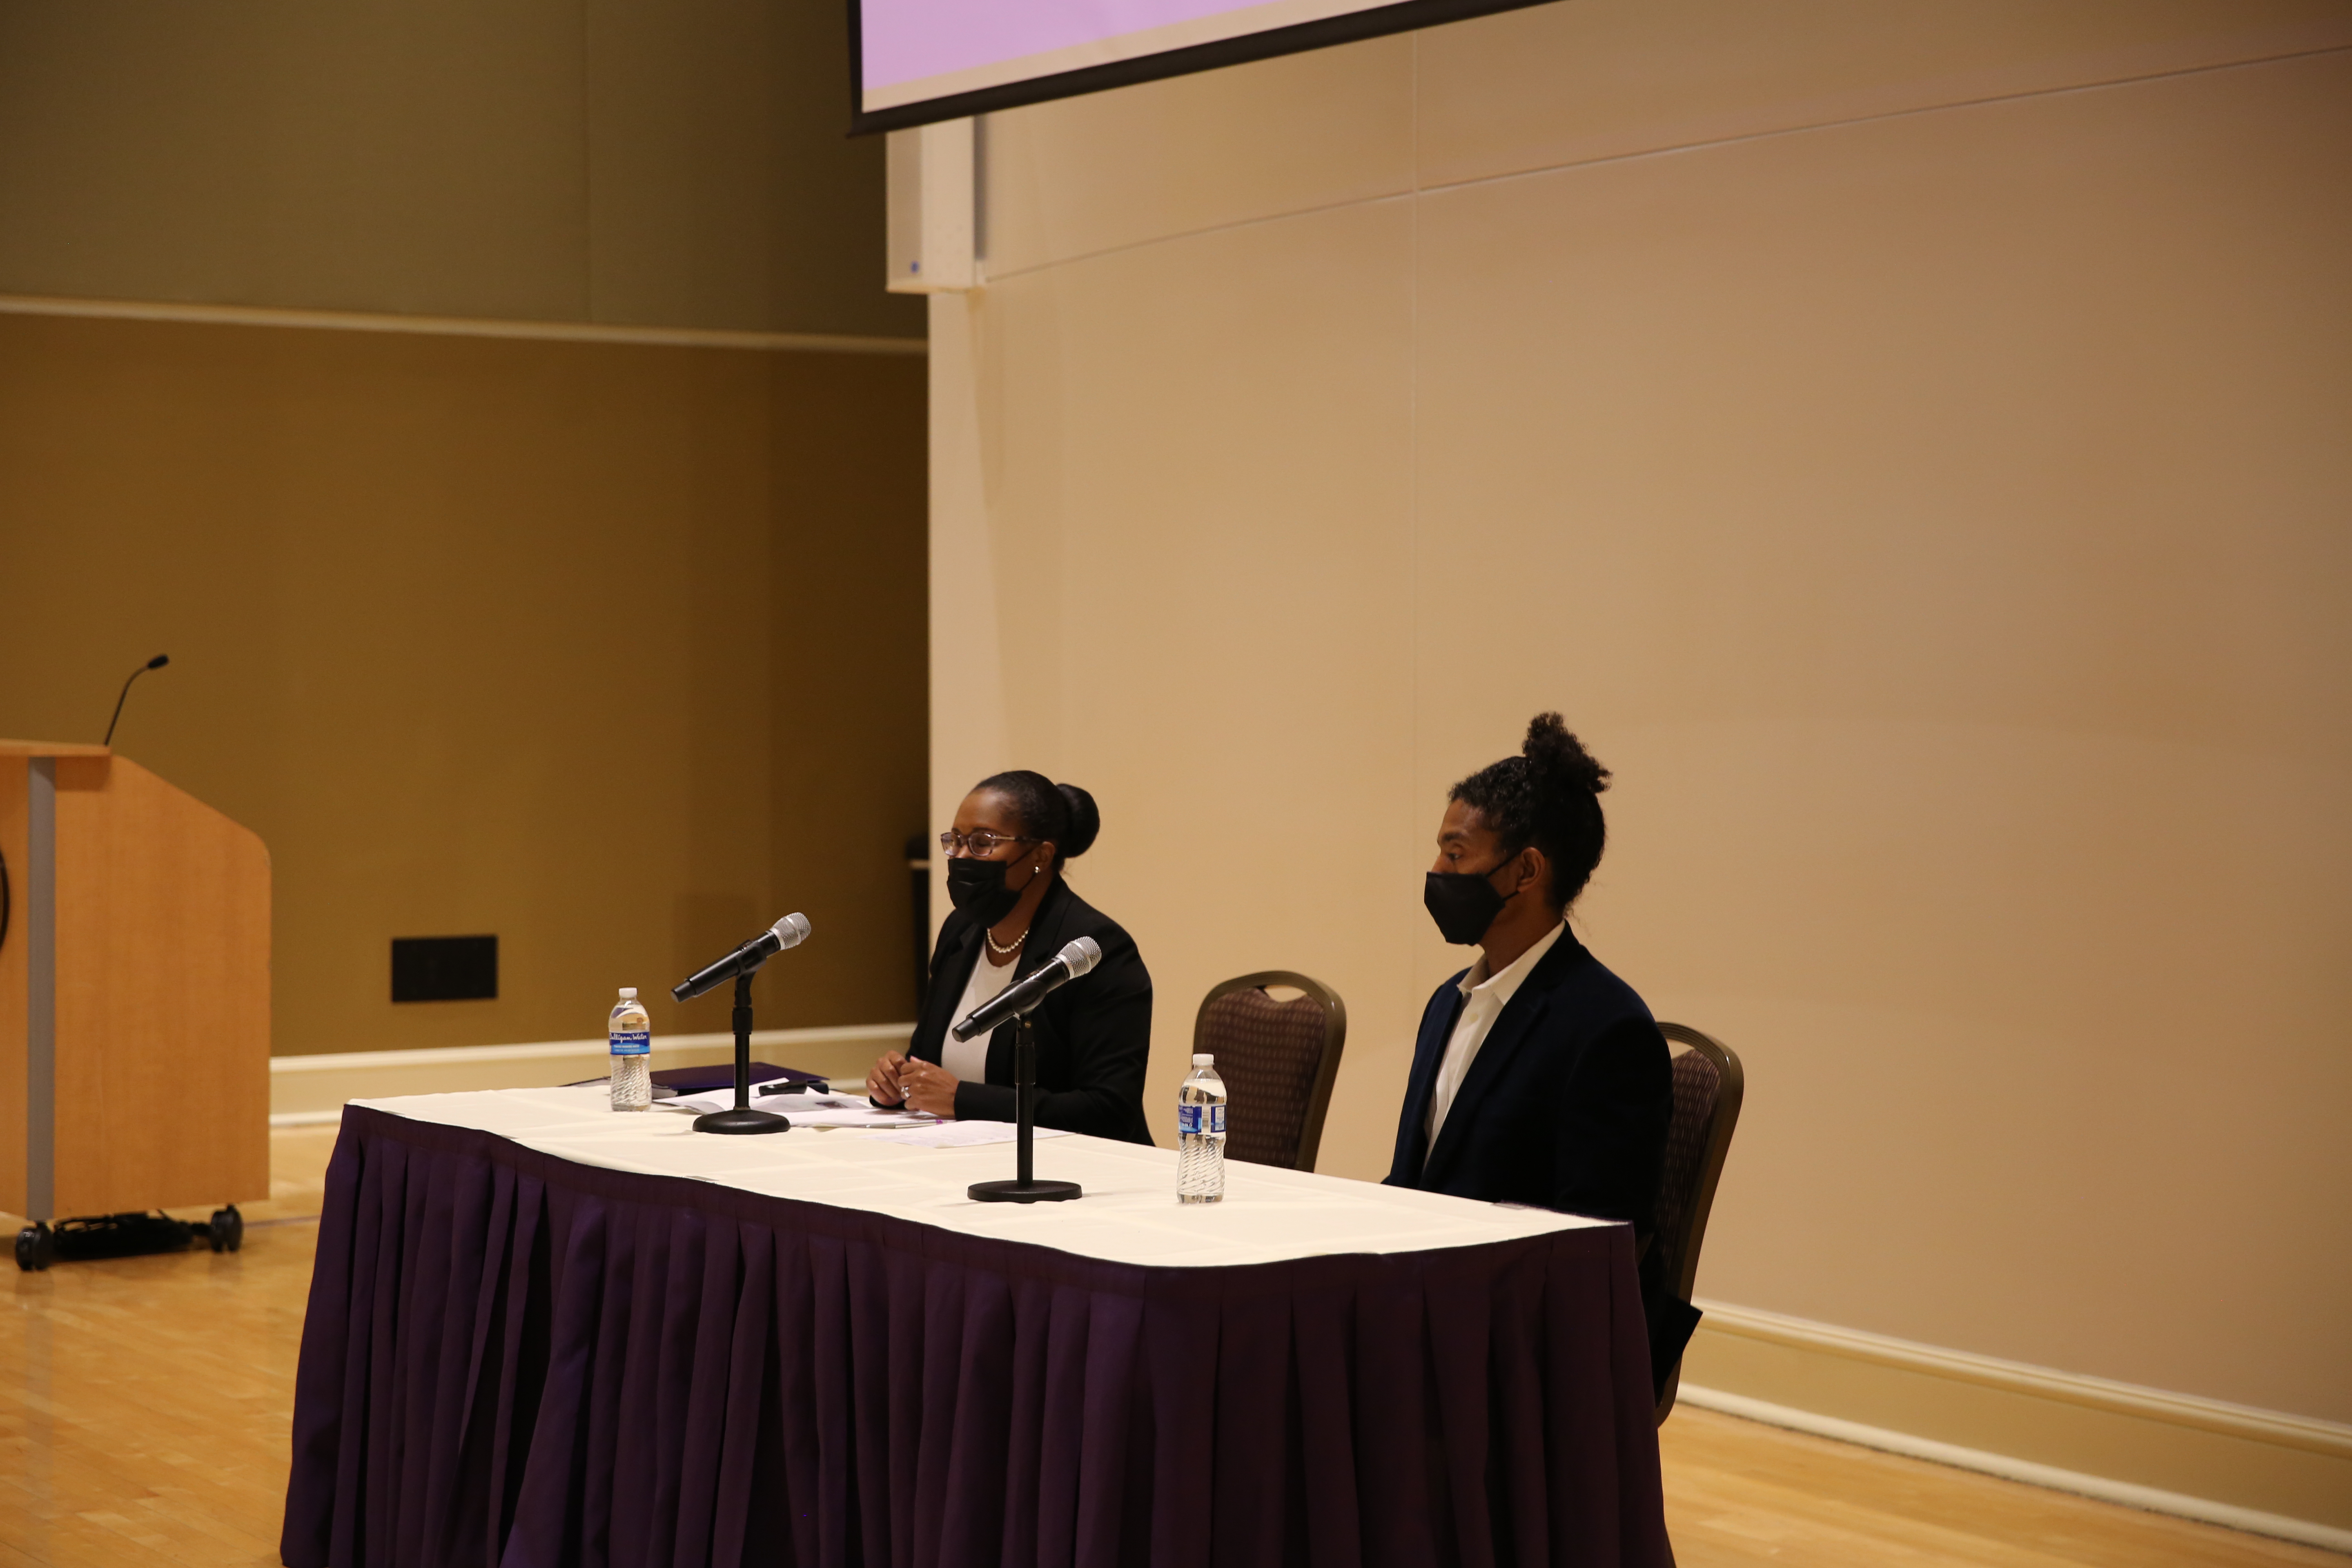 AddRan Dean Sonja Watson, Ph.D., answers an audience question while Frederick Gooding, Ph.D., looks on during the "Symposium on Afro-Latin American History and Culture 2021."